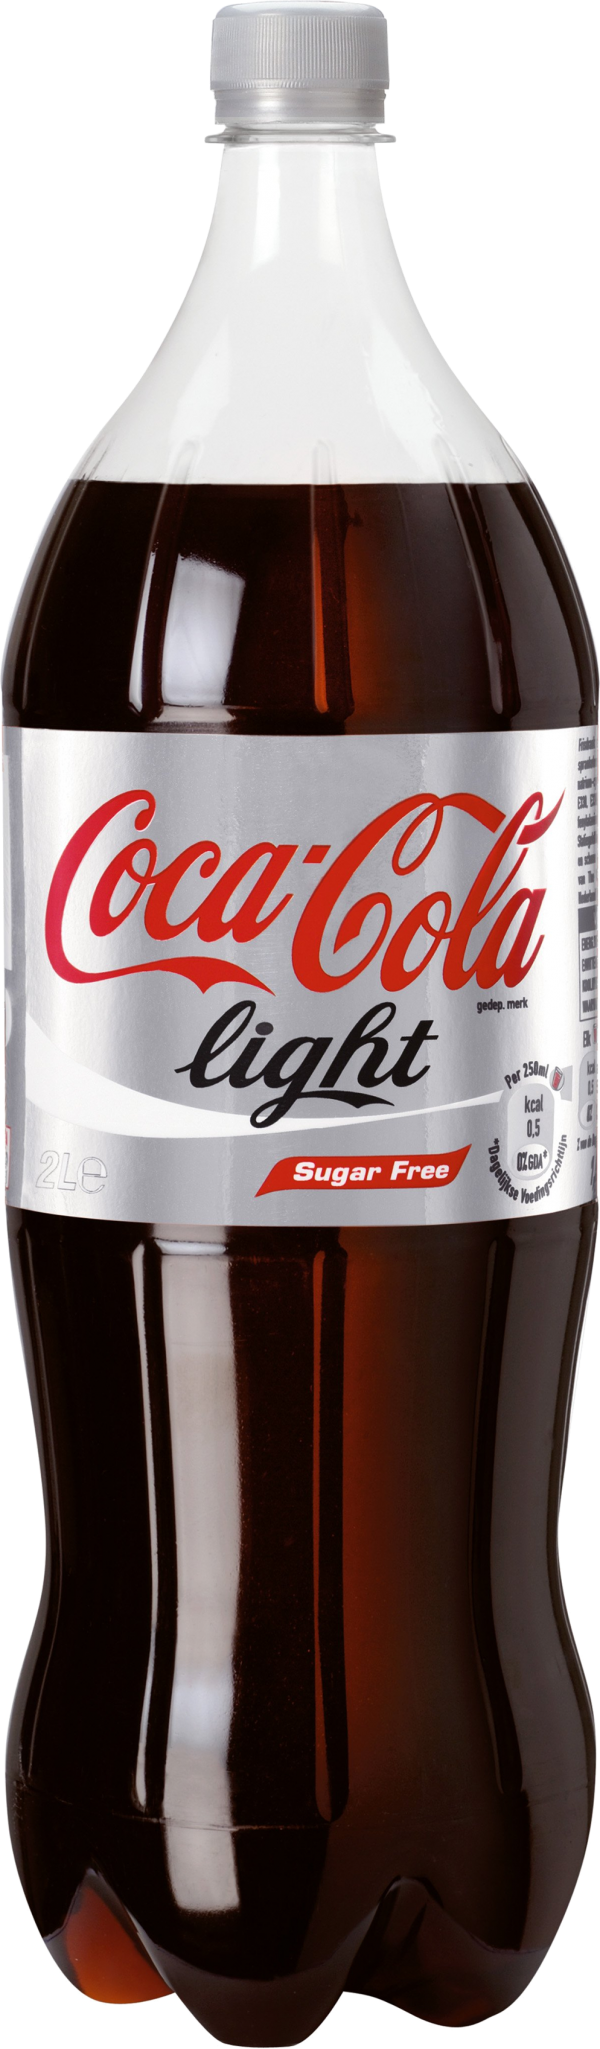 cocacola png free download 15